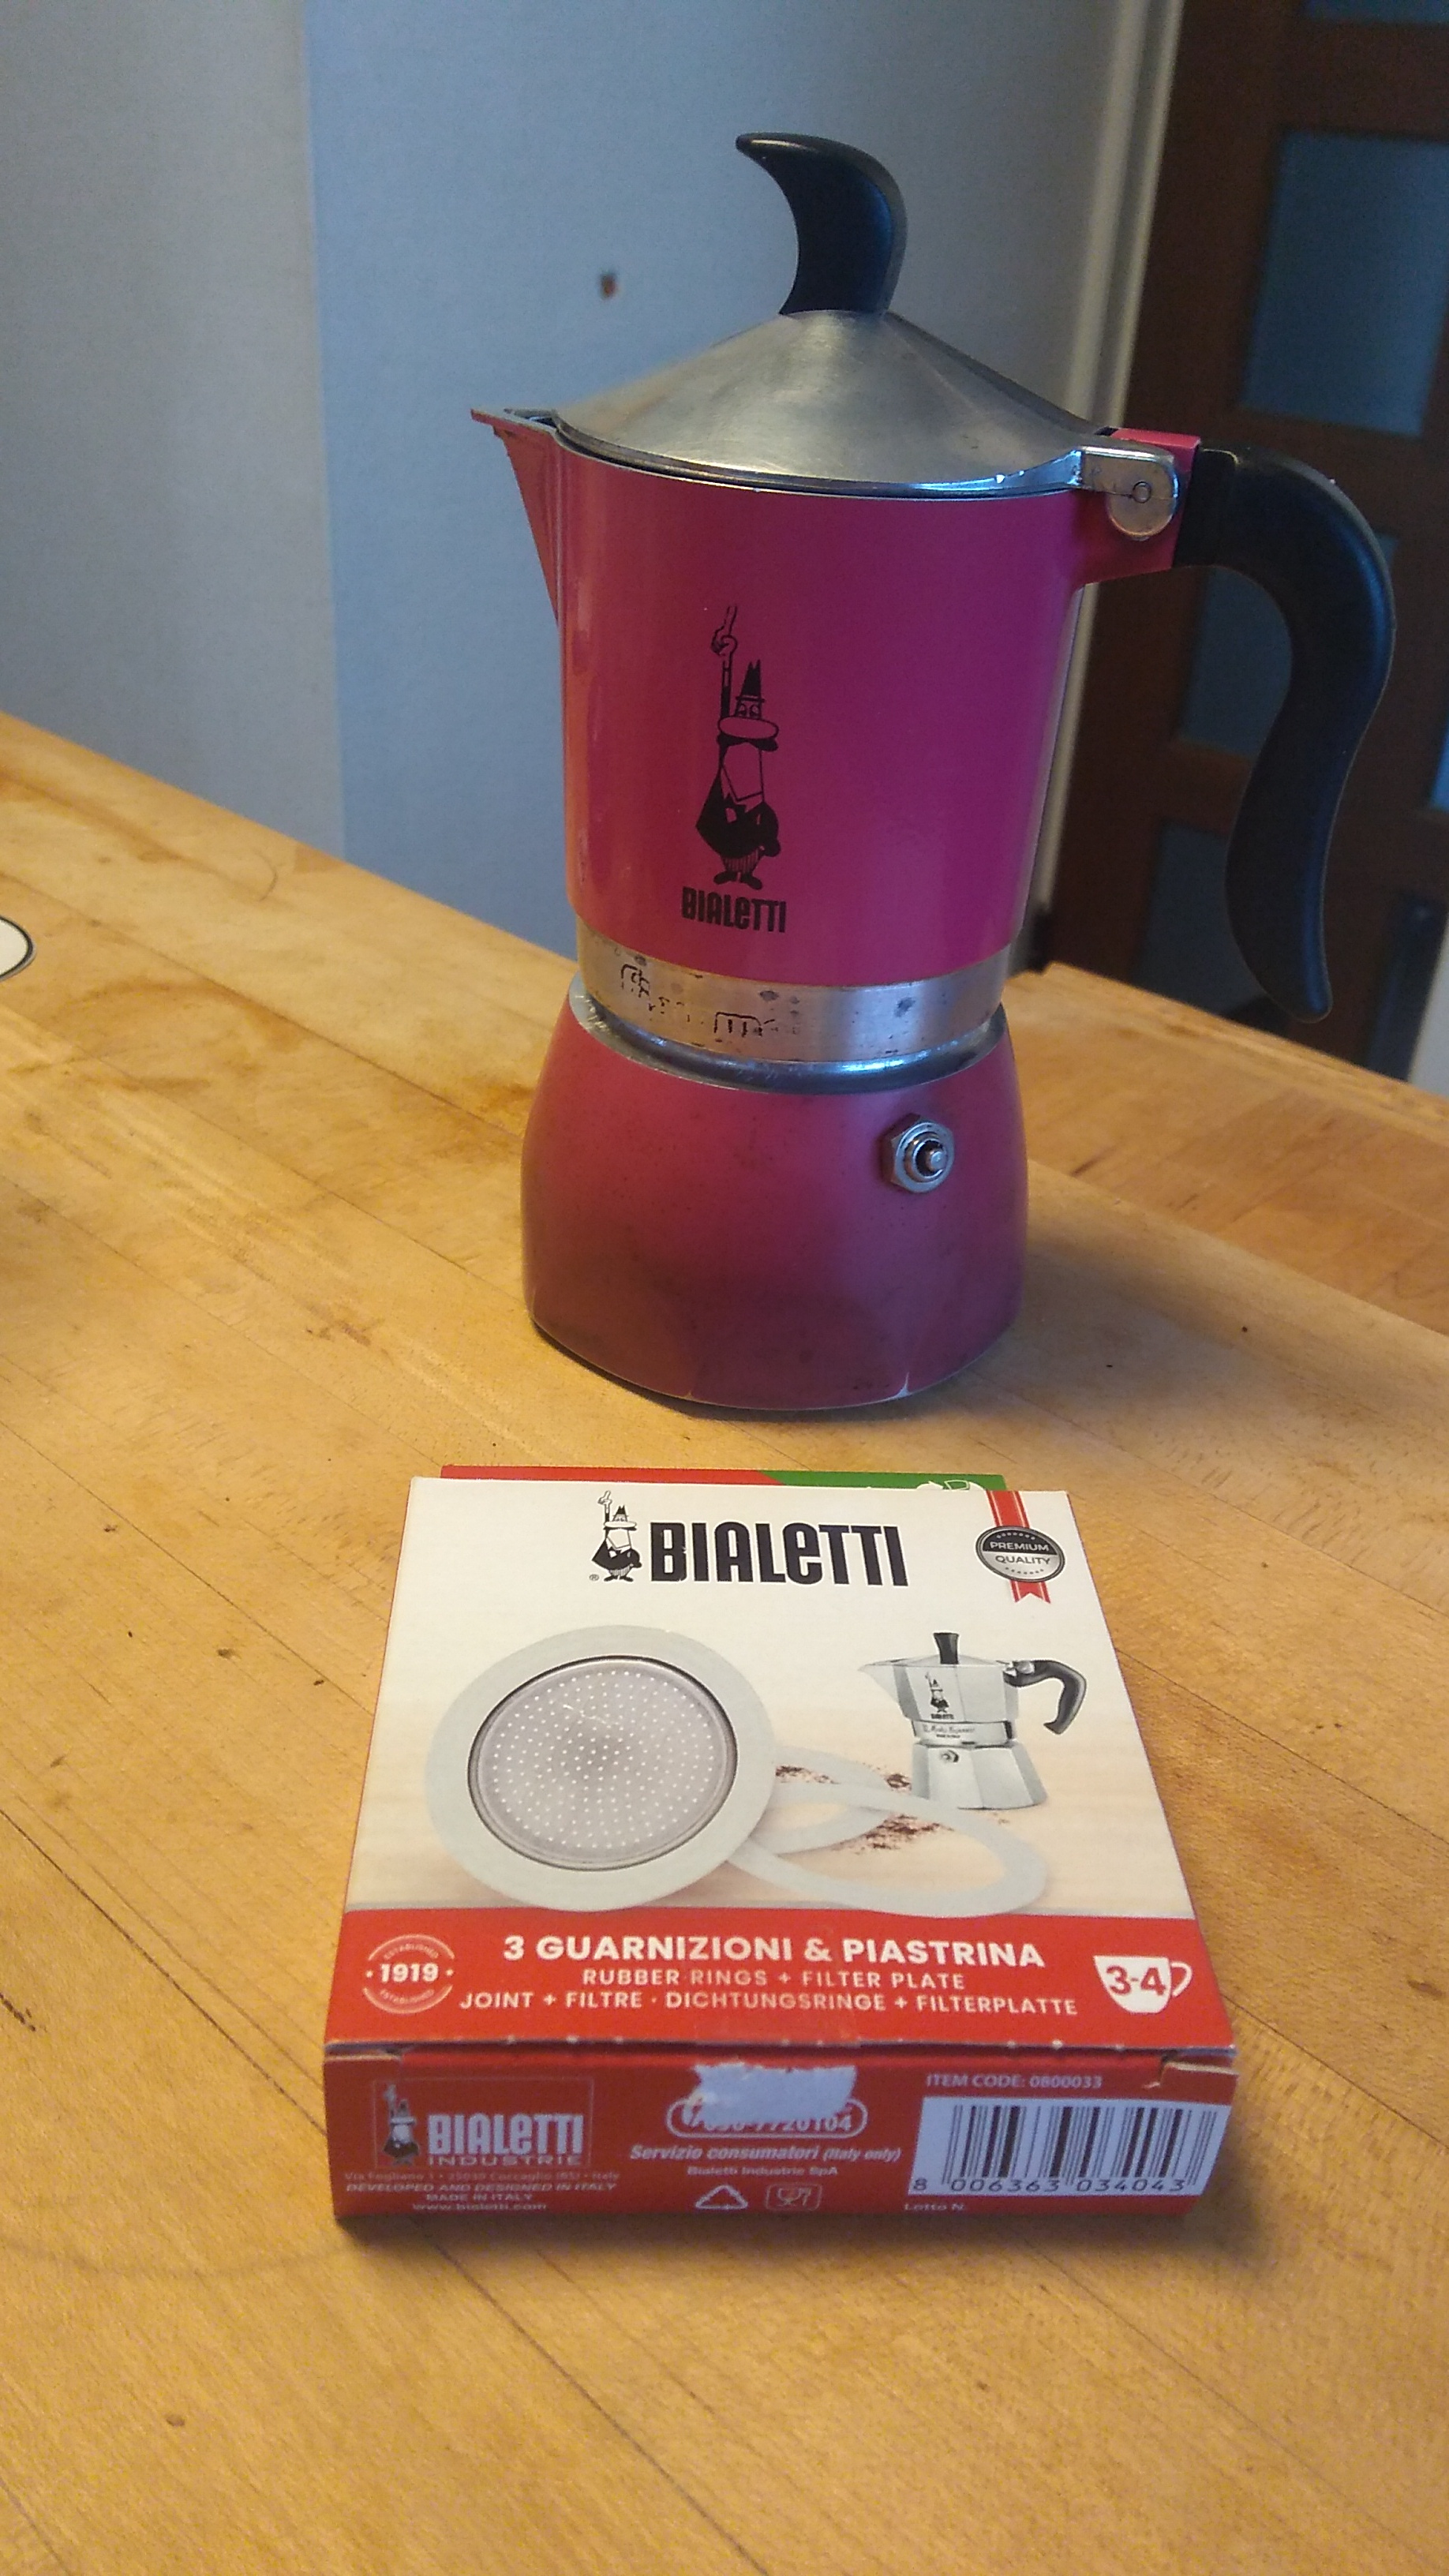 A fully assembled induction coffee maker, with the Bialetti logo of a mustached cartoon figure with one arm raised high with a pointed finger as if making an emphatic statement. A box of replacement seals sits in front of the assembled coffee maker.